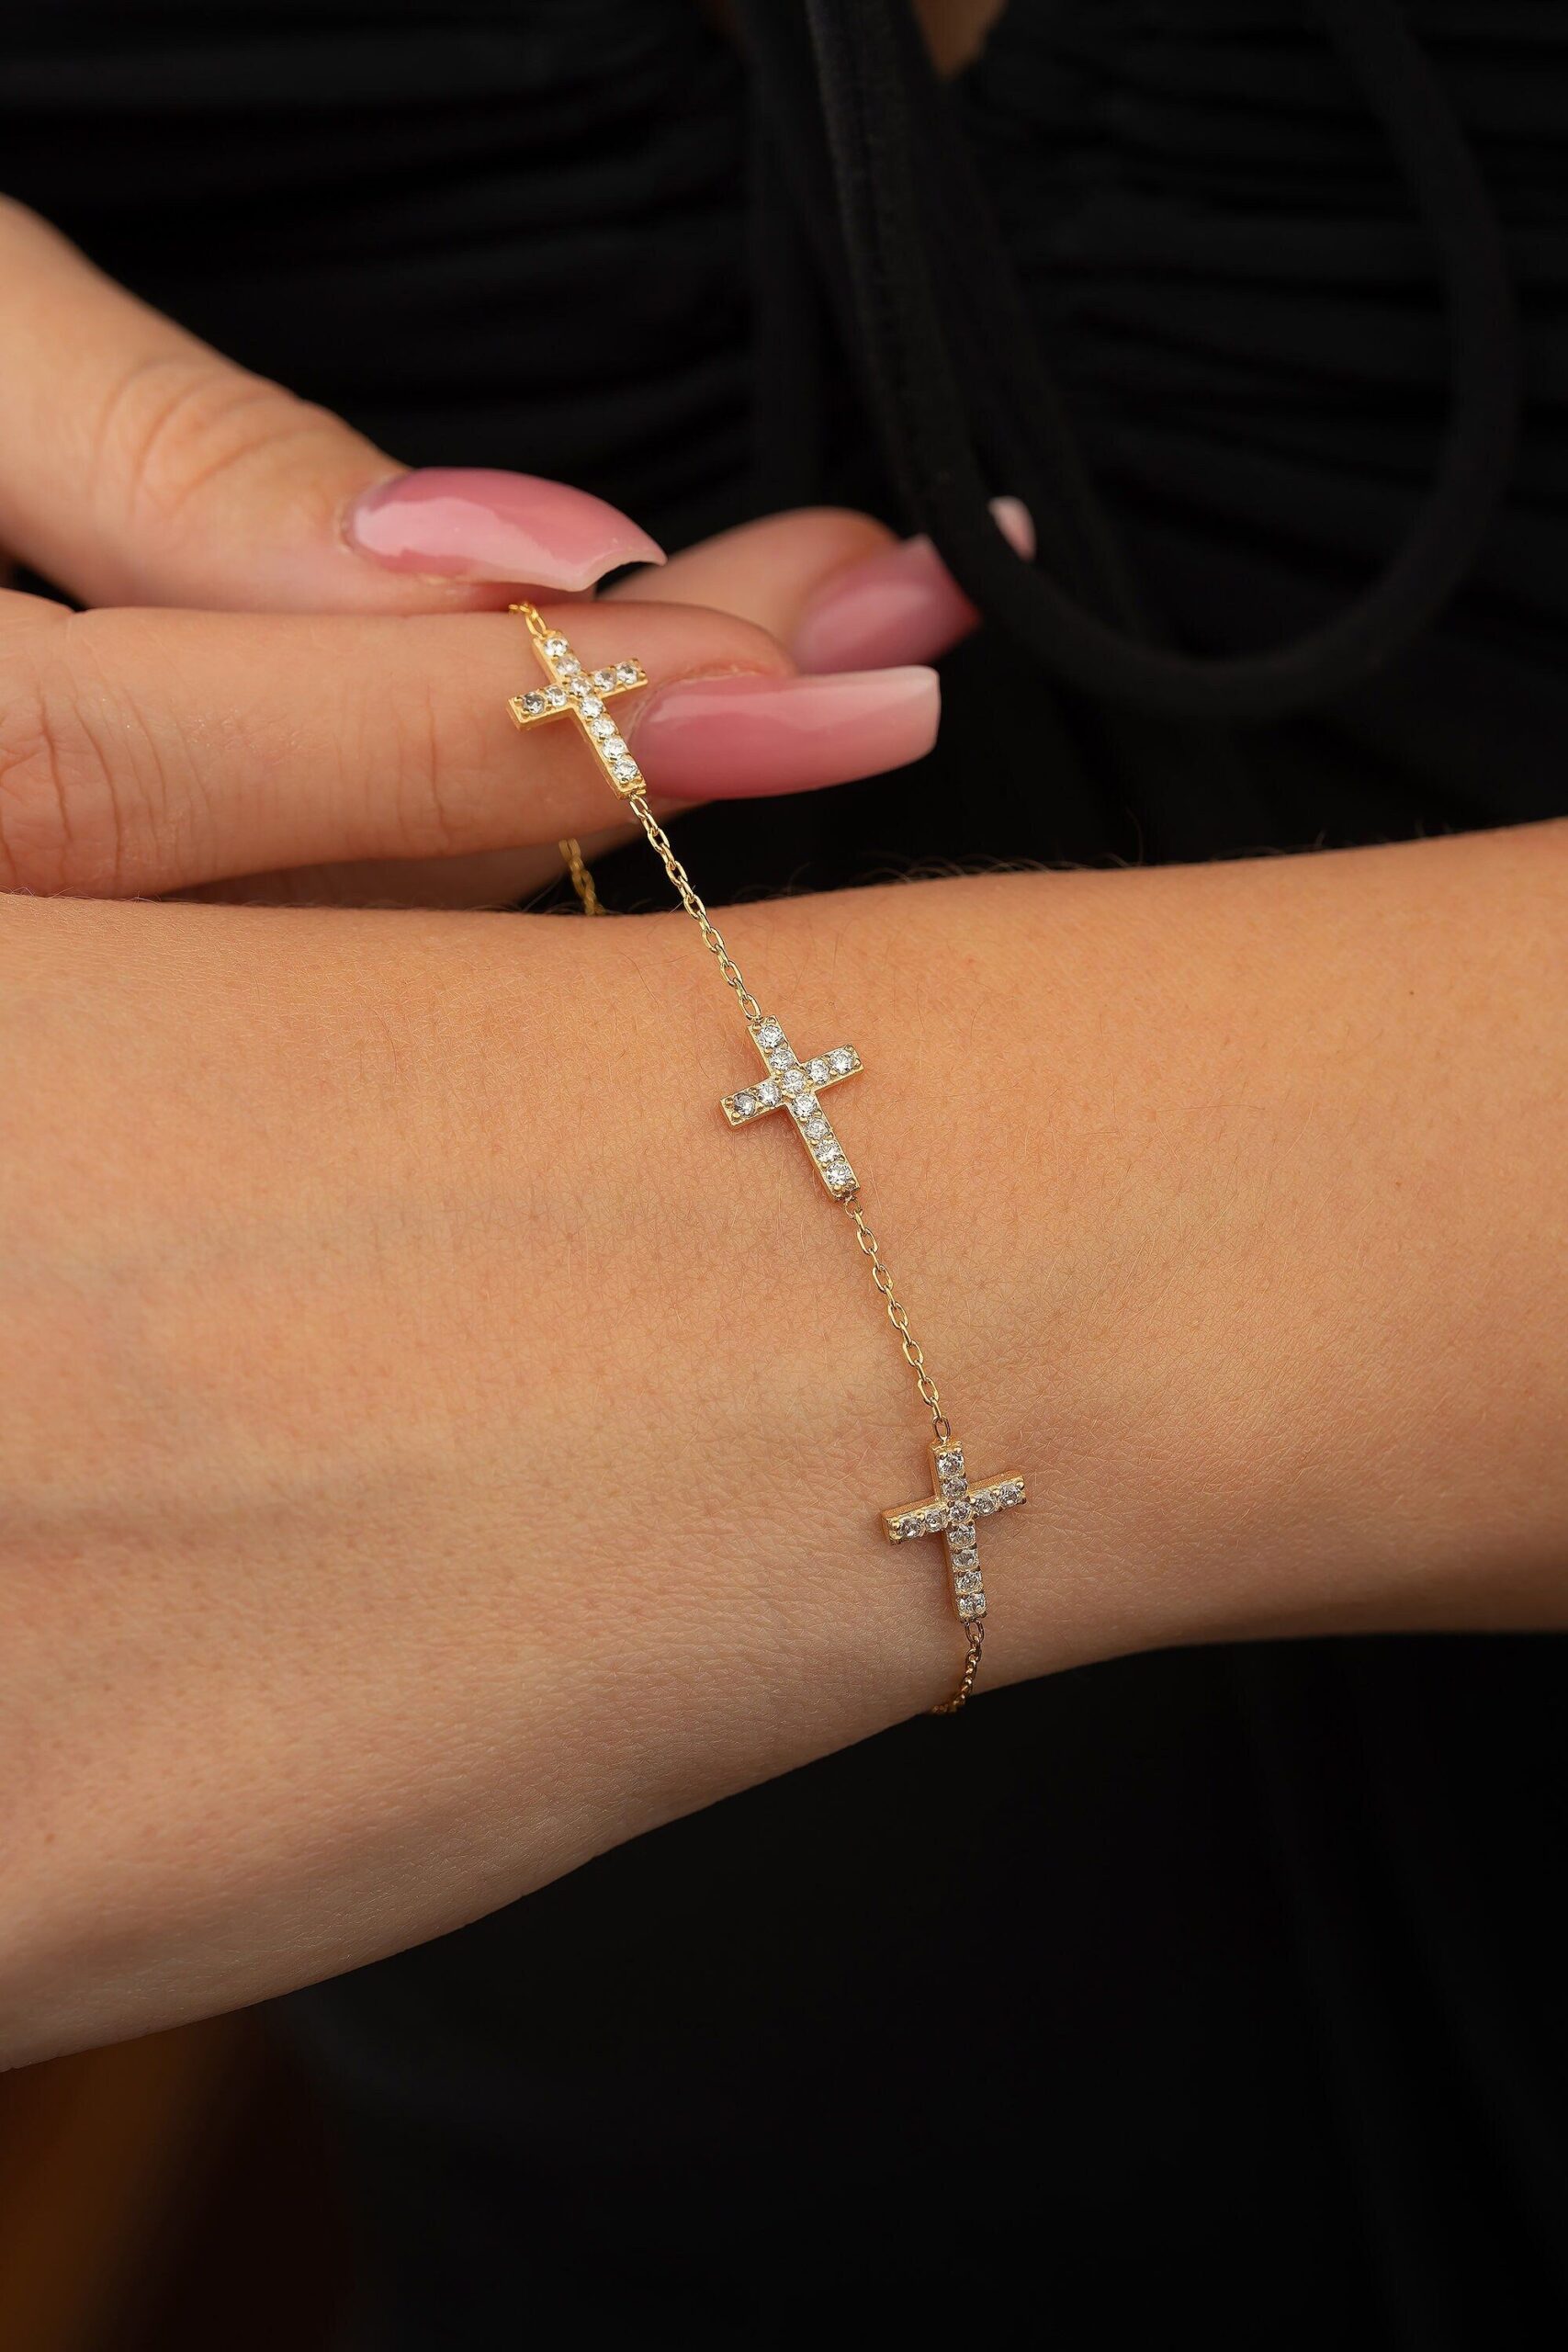 Importance of religious jewelry